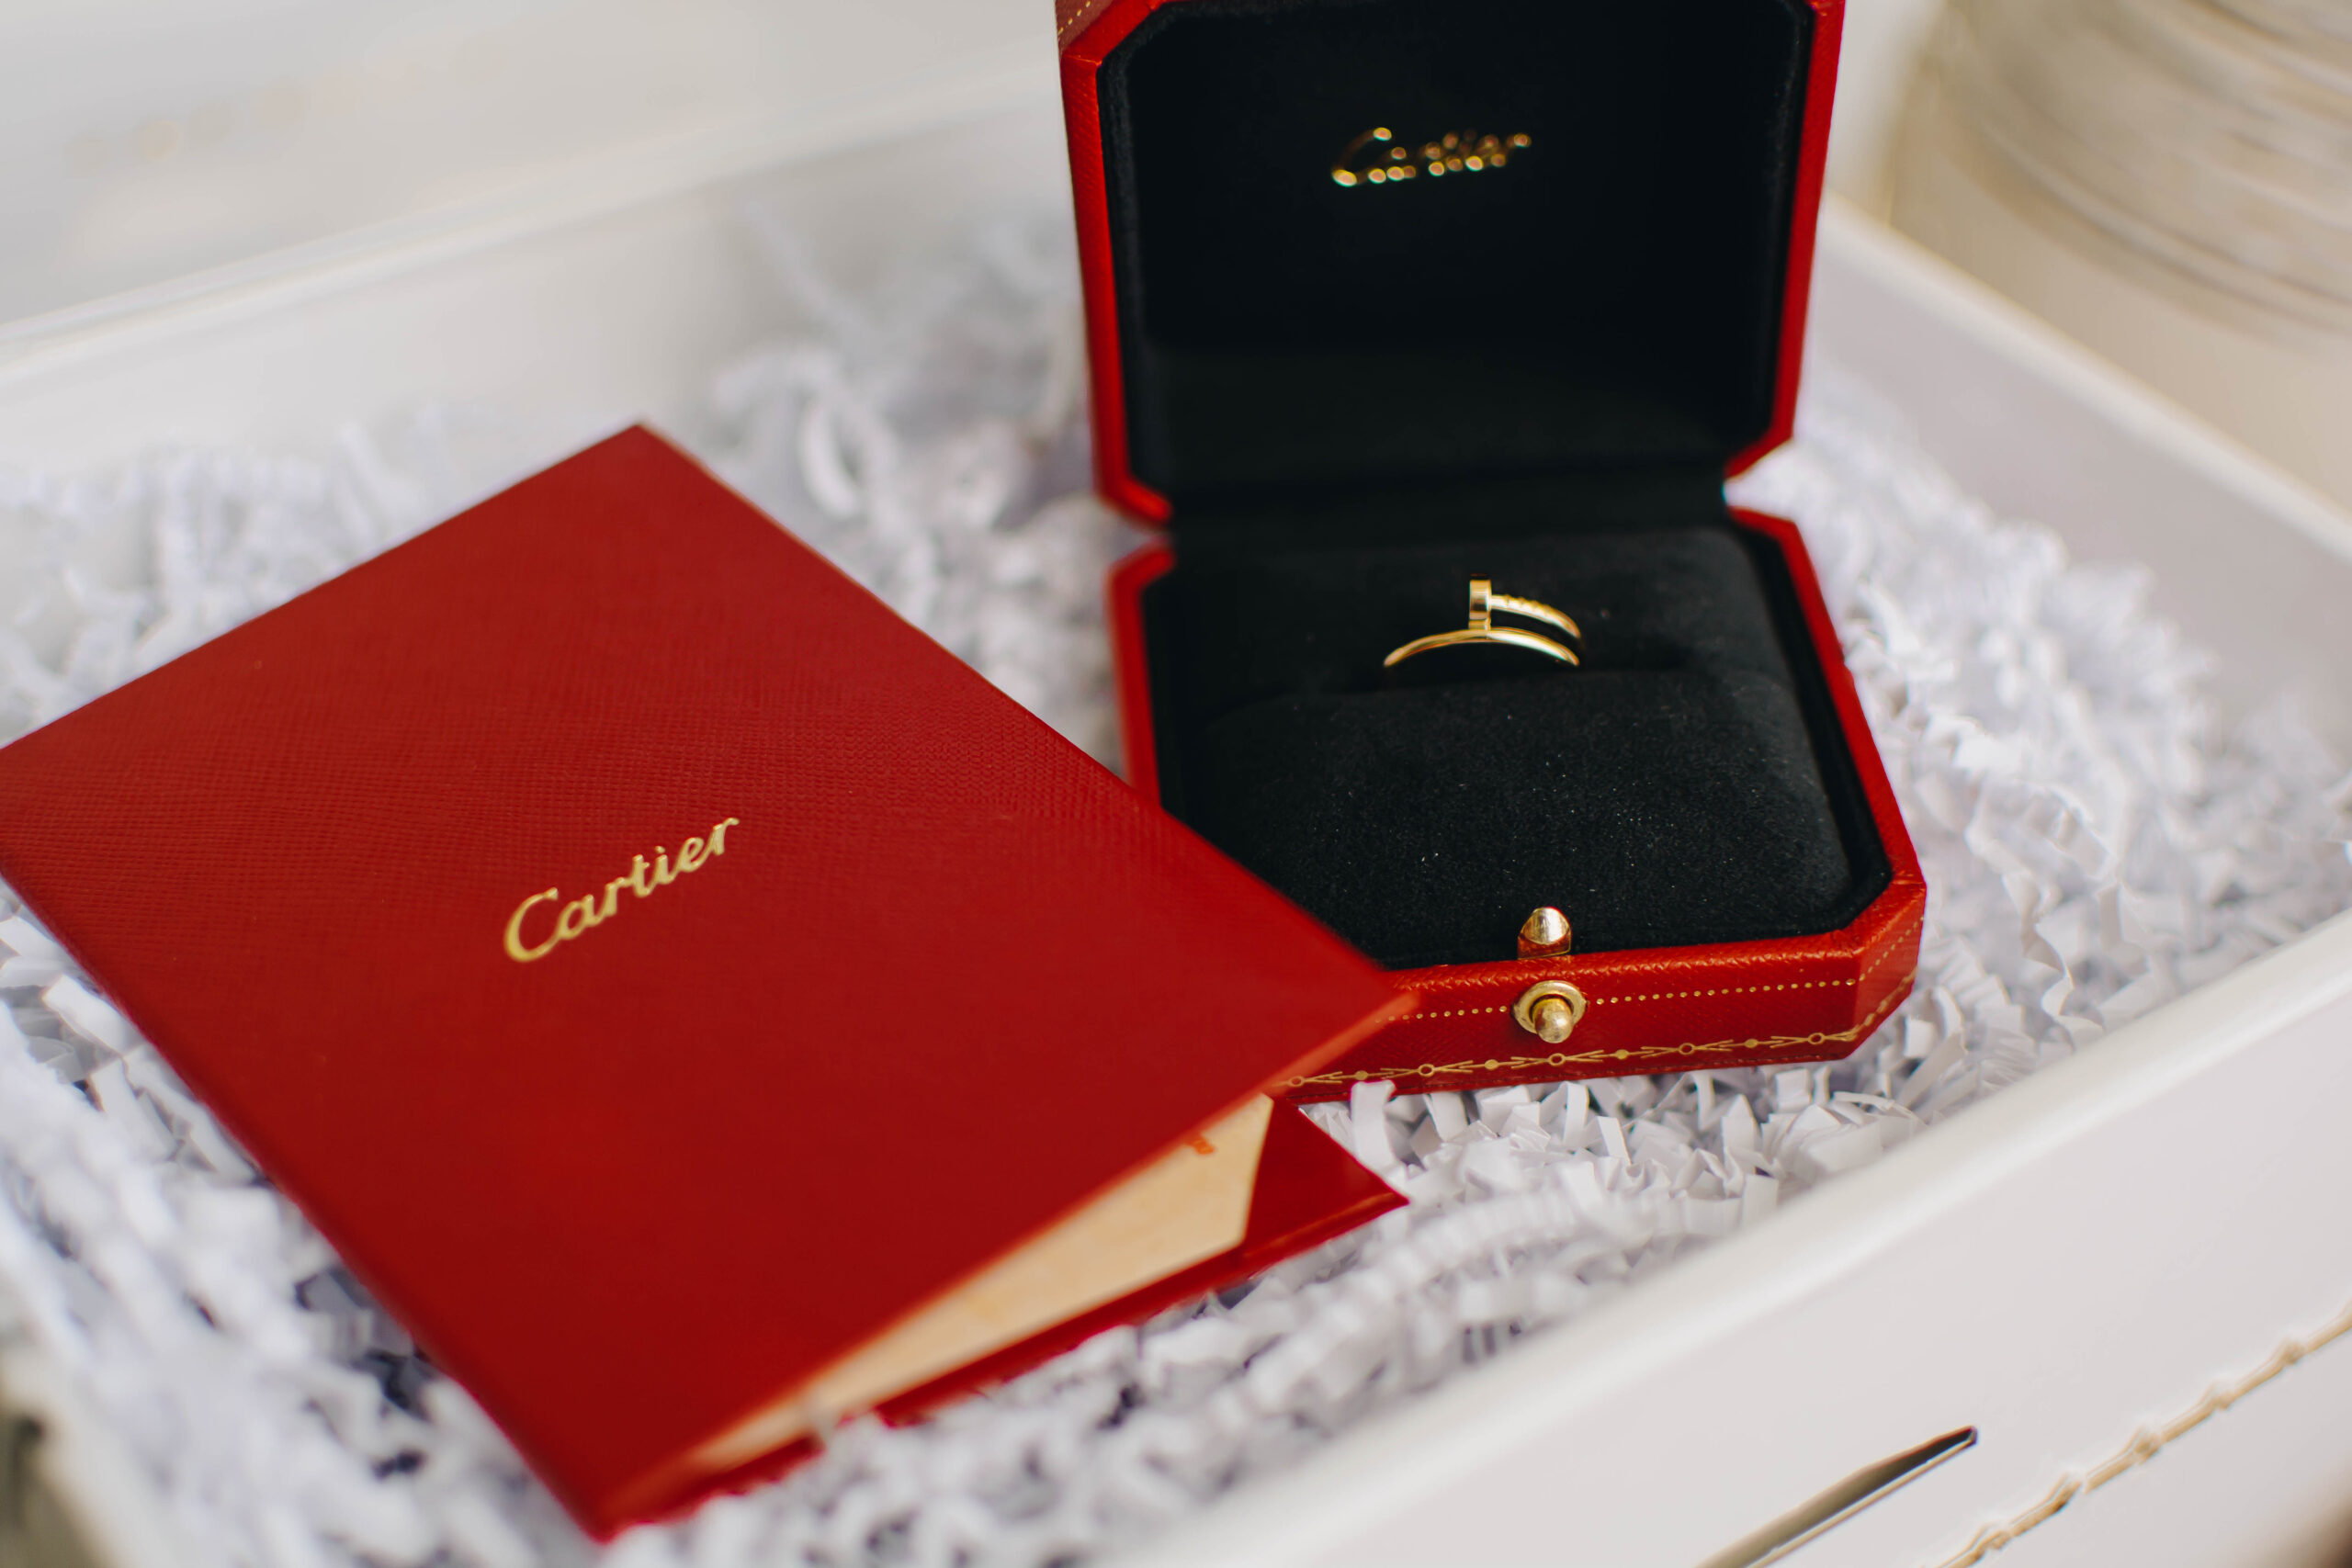 Cartier Juste Un Clou Ring in Yellow Gold smaller version and the certificate. 